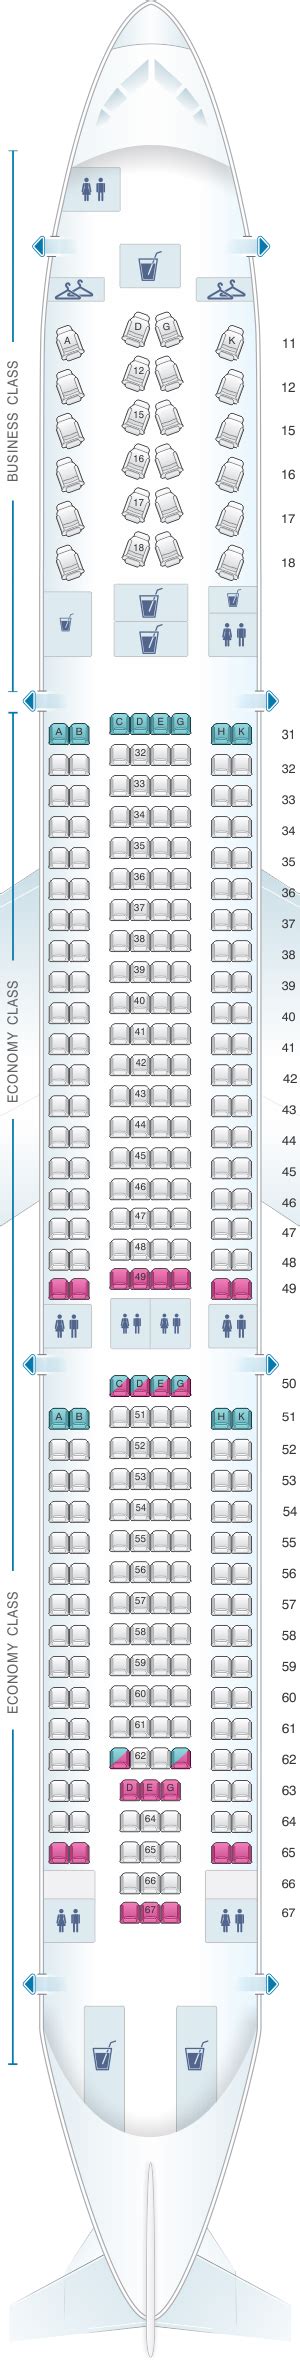 Seat Map Hainan Airlines Airbus A Config Seatmaestro